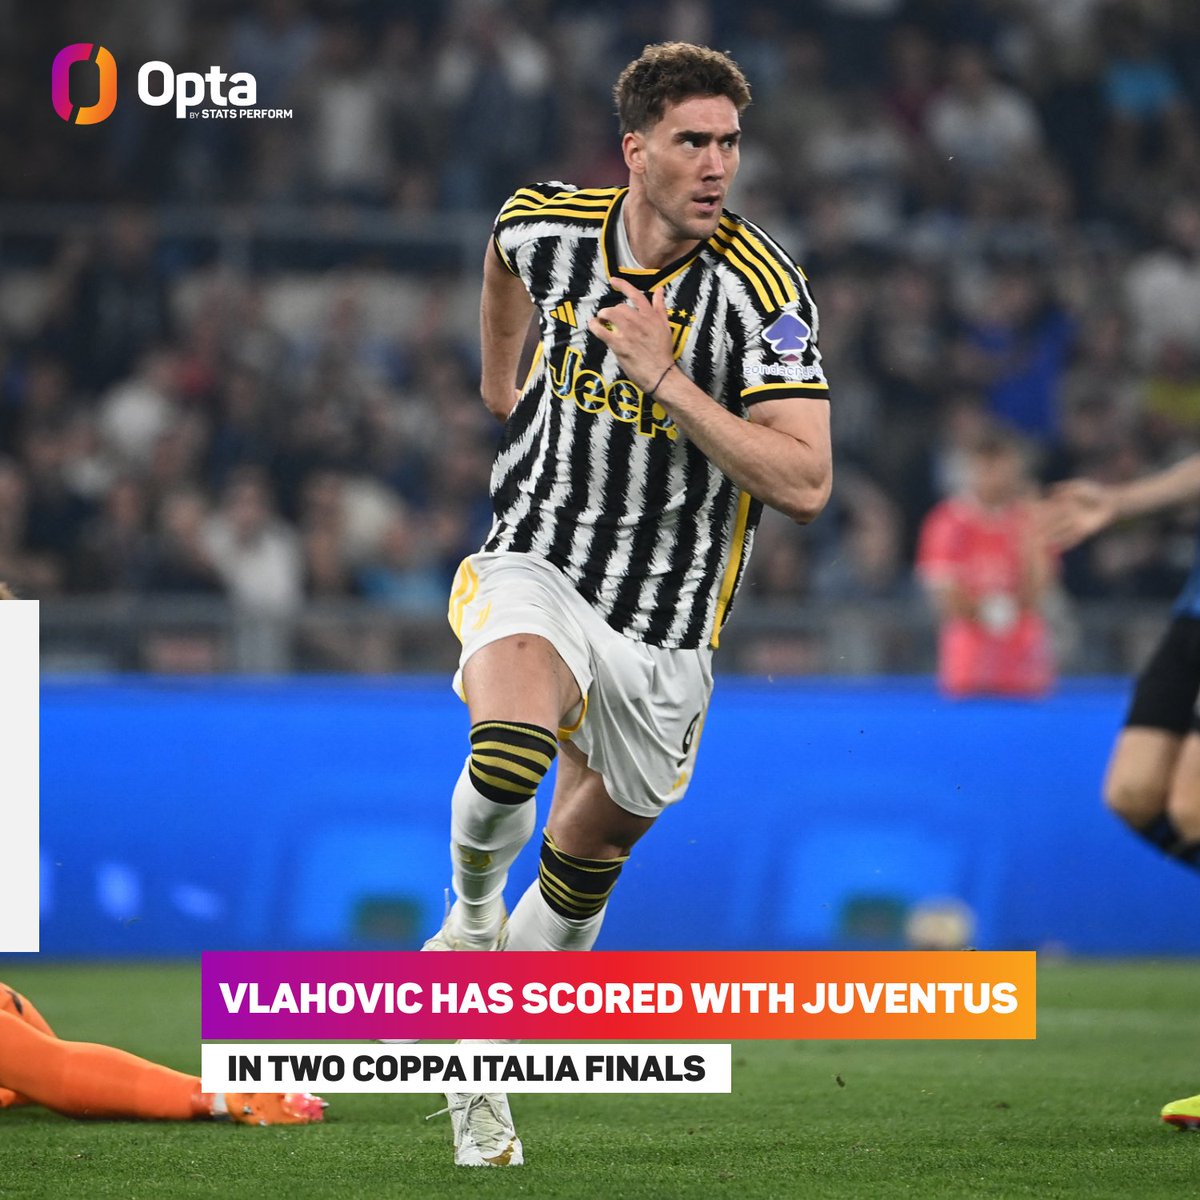 2 - Dusan Vlahovic, after finding the net against Inter on 11 May 2022, has become the third Juventus player to score in two editions of the #CoppaItalia final, after John Charles (1958/59 and 1959/60) and Savino Bellini (1937/38 and 1941/42). Stamp. #AtalantaJuve